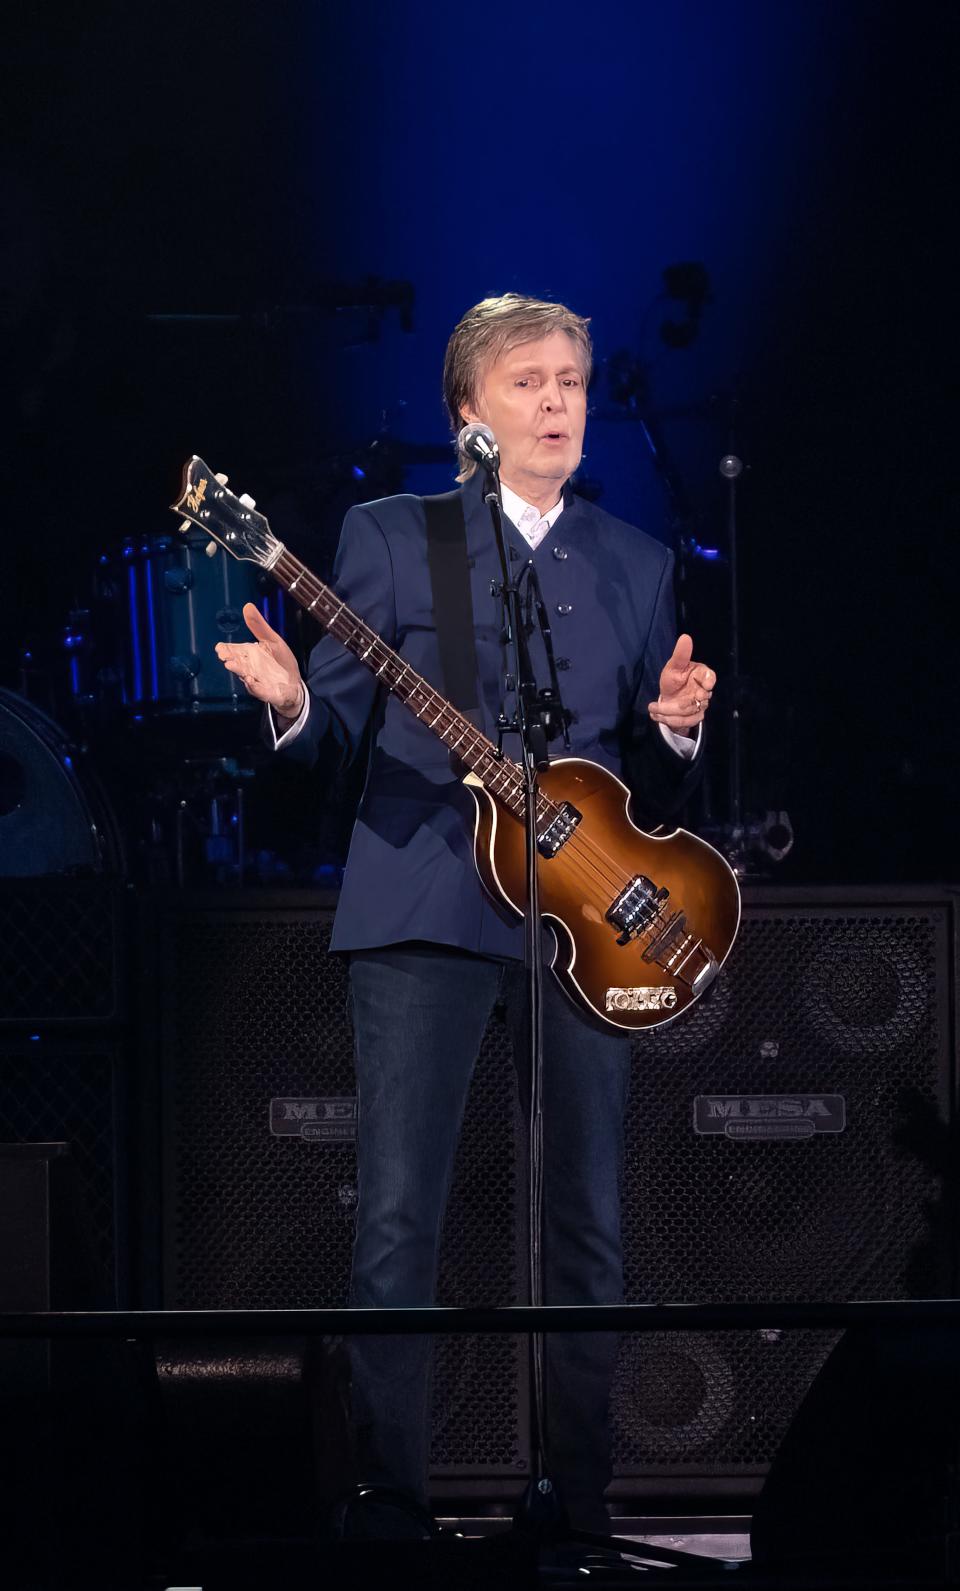 Paul McCartney's plays in his Got Back tour show at MetLife stadium on June 16, 2022.